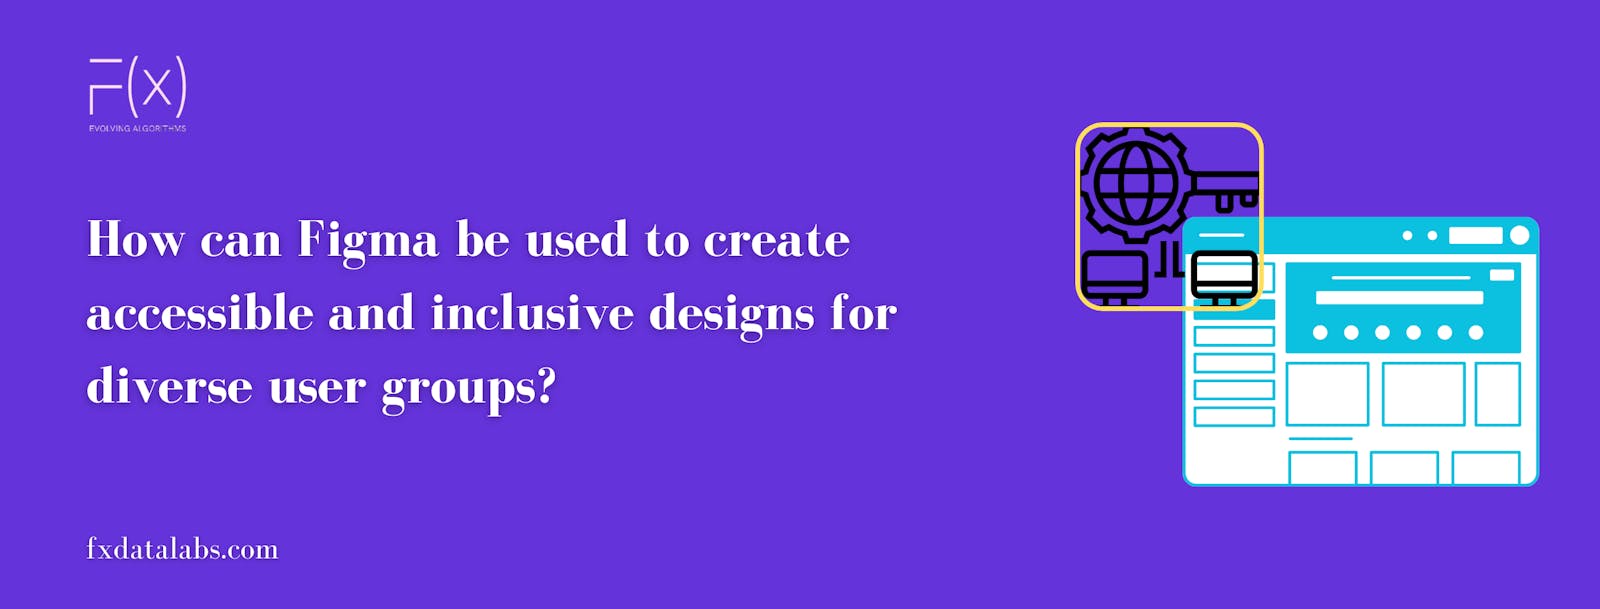 How can Figma be used to create accessible and inclusive designs for diverse user groups?